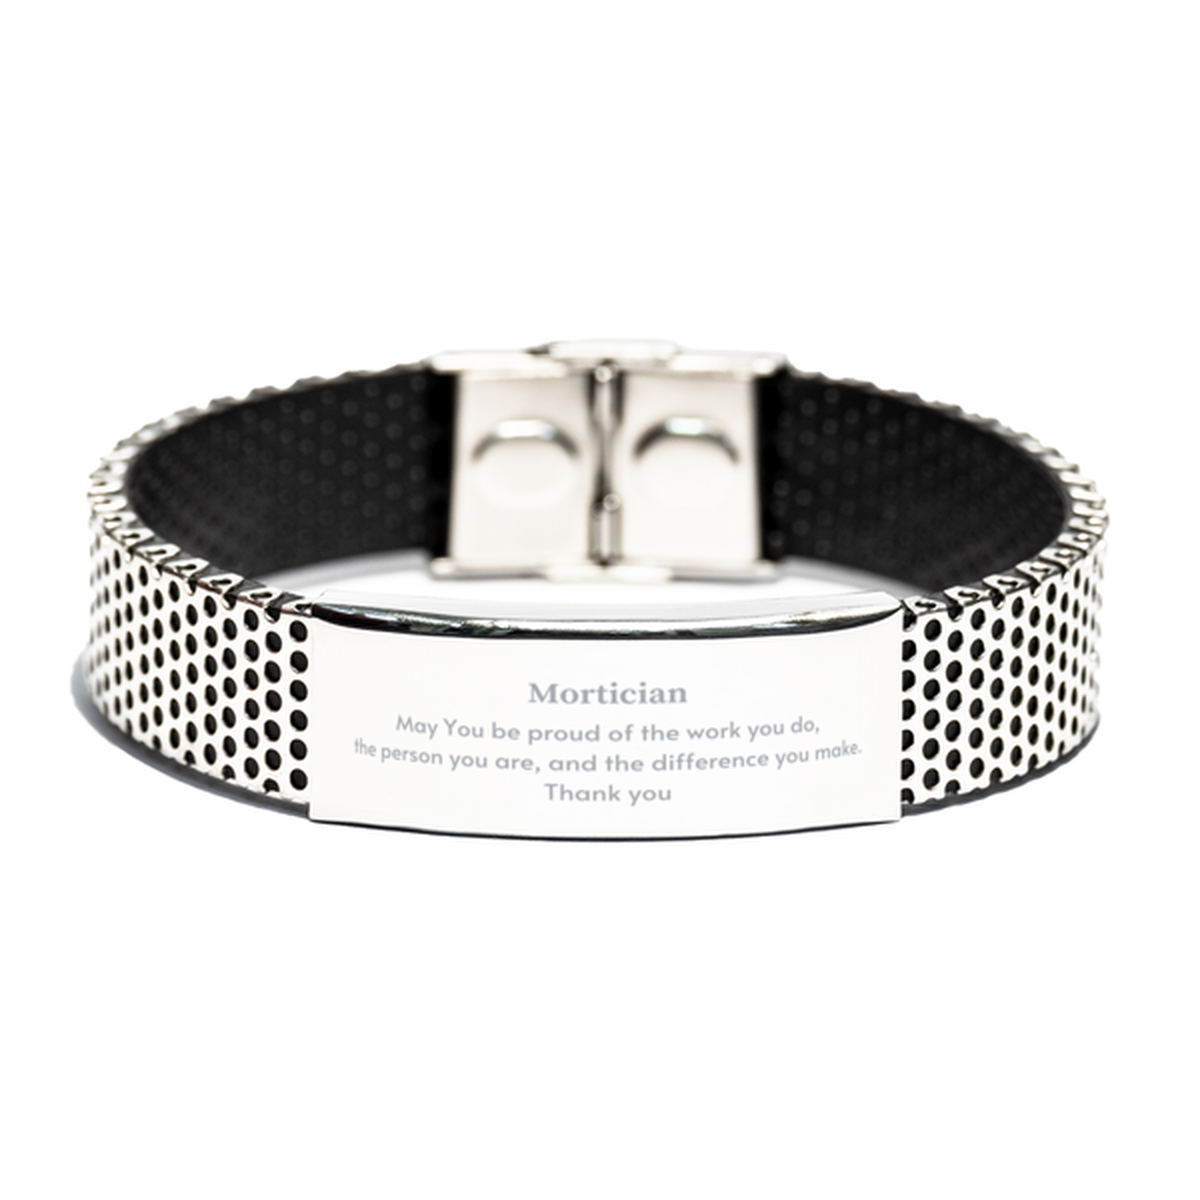 Heartwarming Stainless Steel Bracelet Retirement Coworkers Gifts for Mortician, Mortician May You be proud of the work you do, the person you are Gifts for Boss Men Women Friends